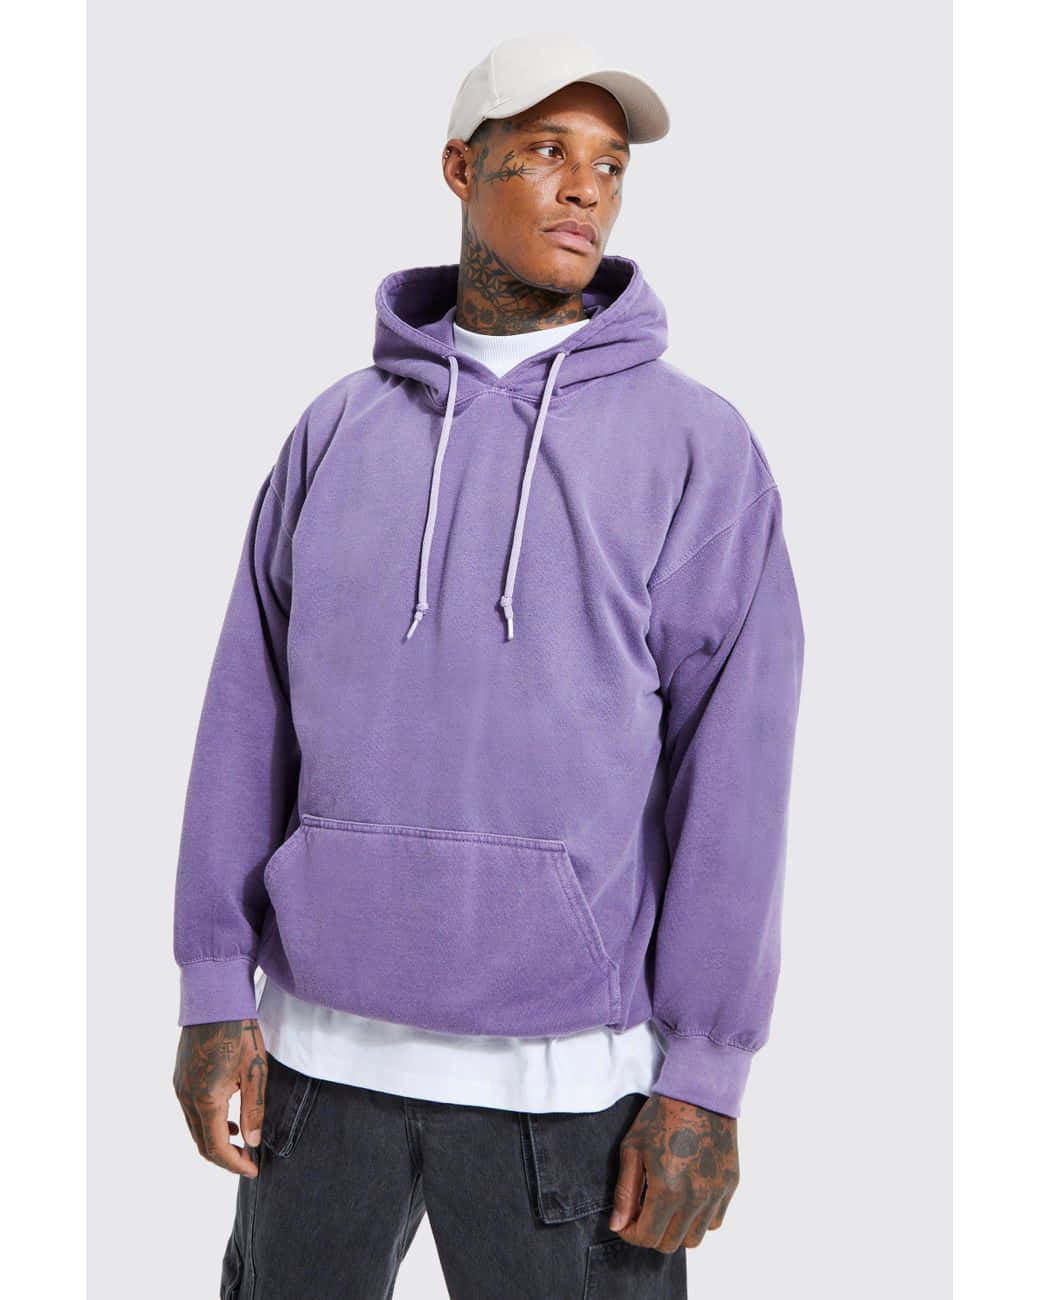 Style yourself with a comfortable and fashion-forward Purple Sweatshirt Wallpaper